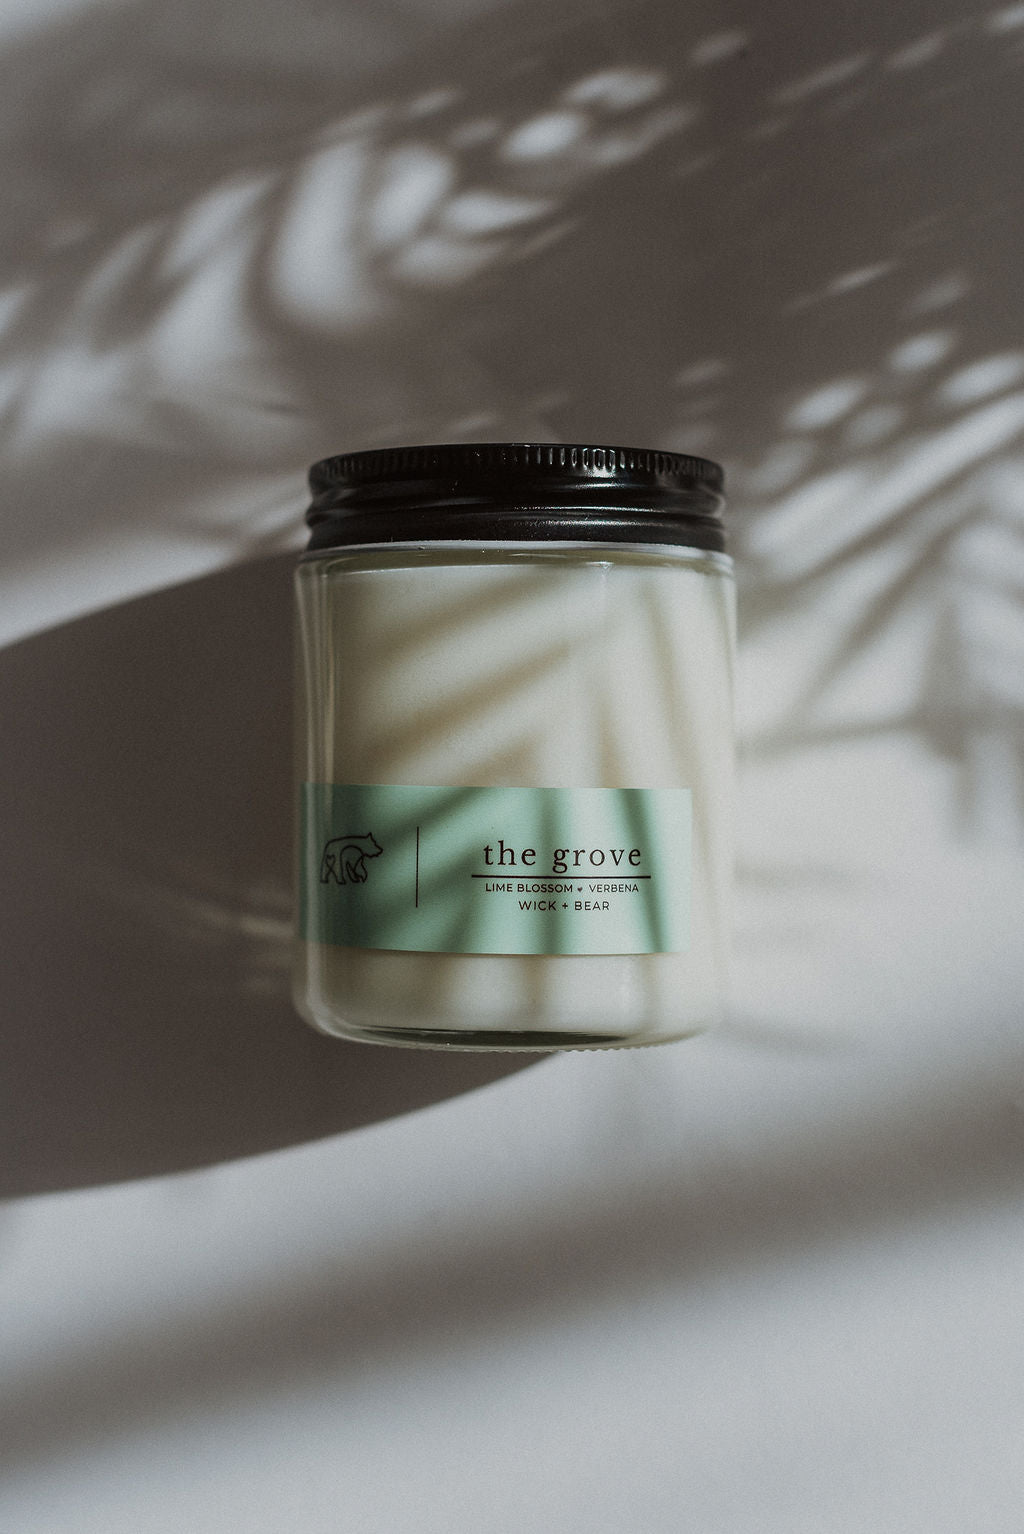 The grove scented candle.